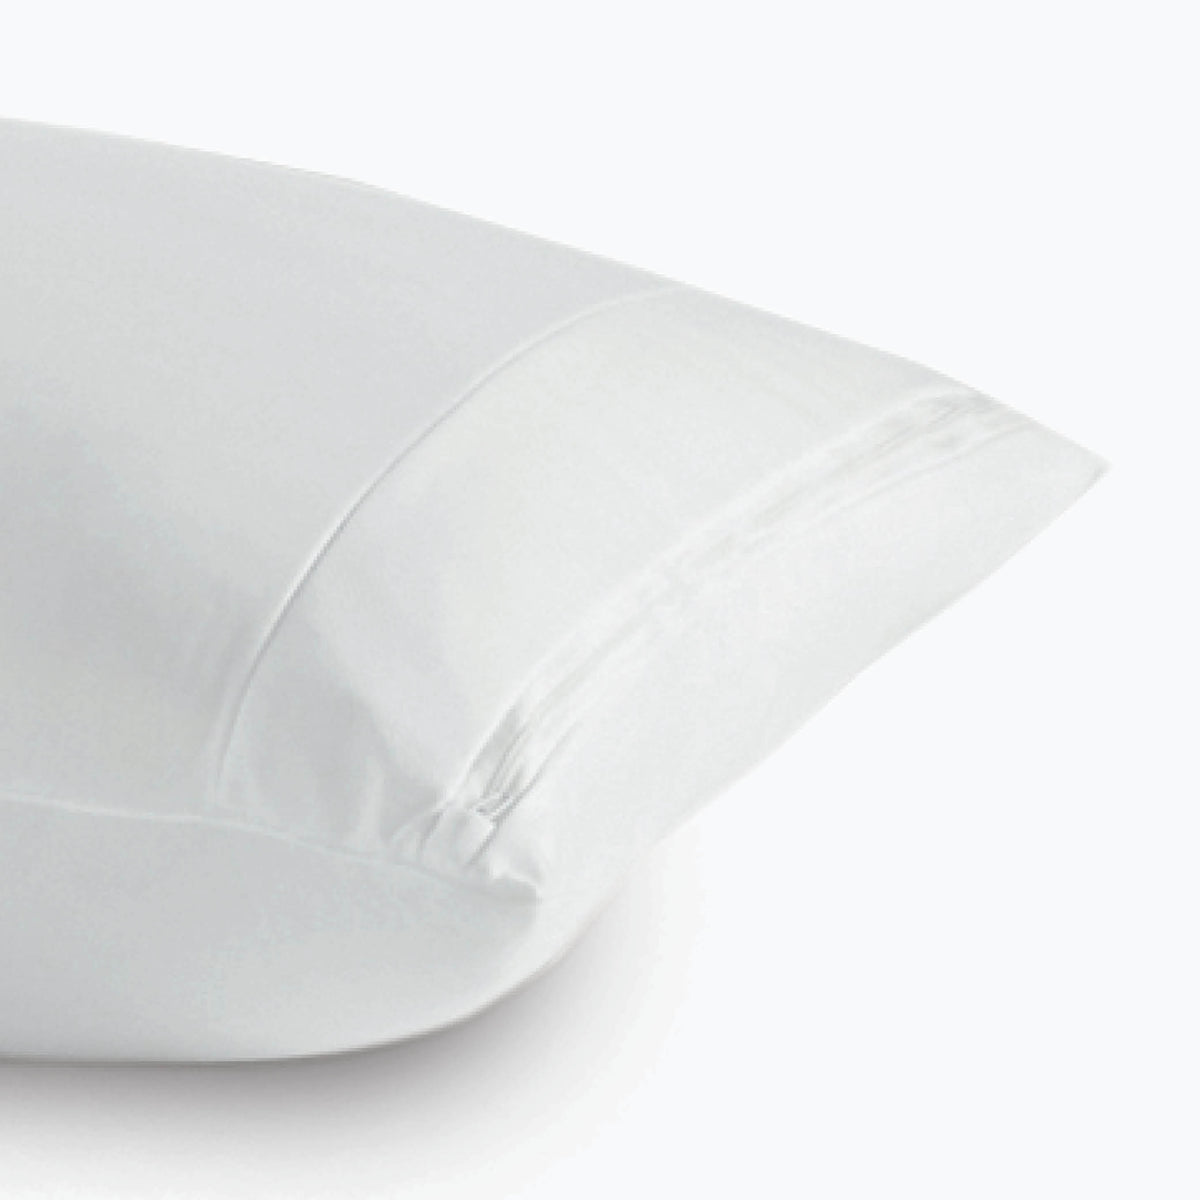 Image of a Pillow Protector on a pillow on a white background showcasing the AirXchange® feature and zipper